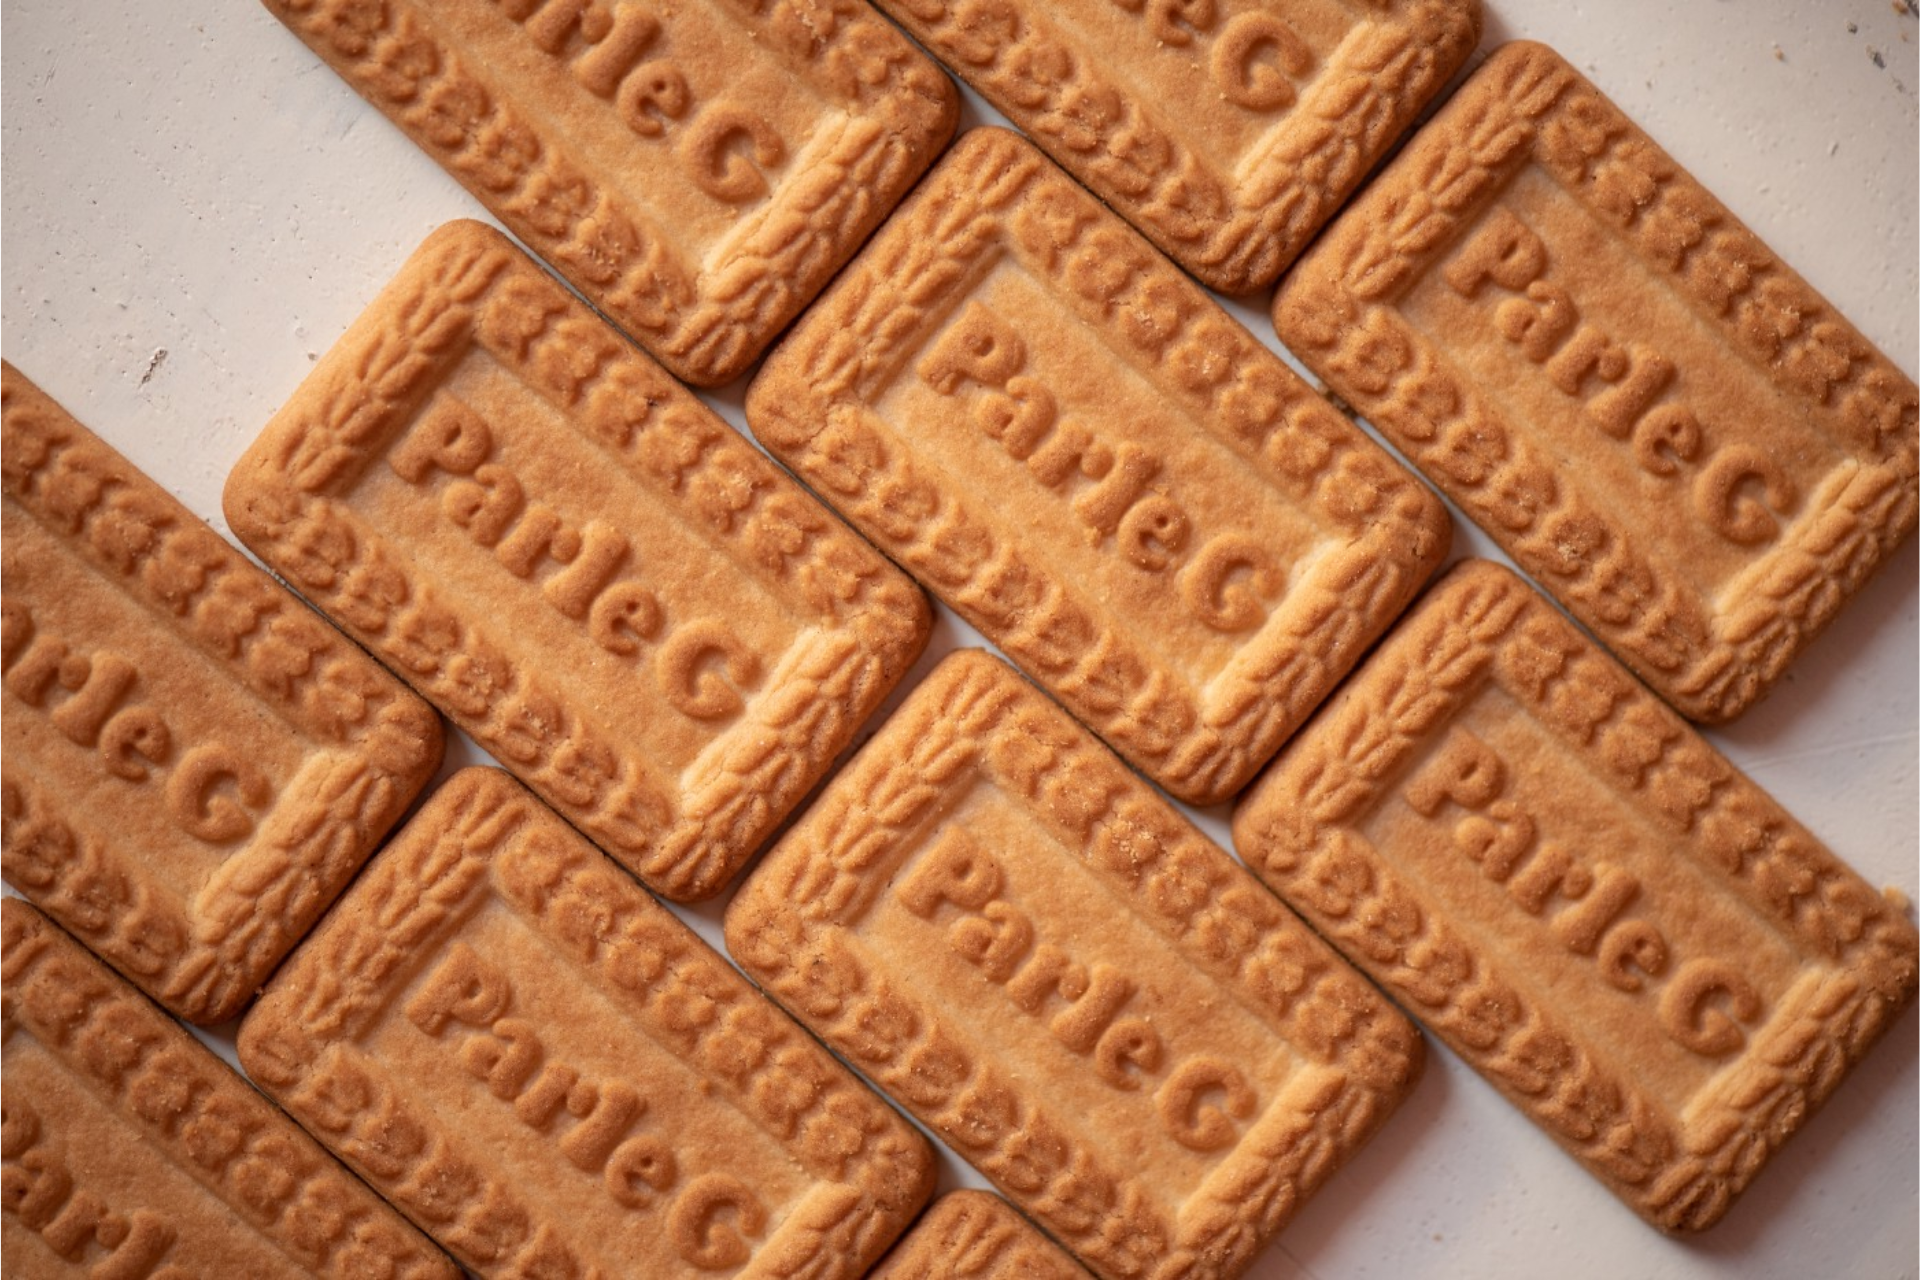 How Parle-G became the Iconic Biscuit Brand of India